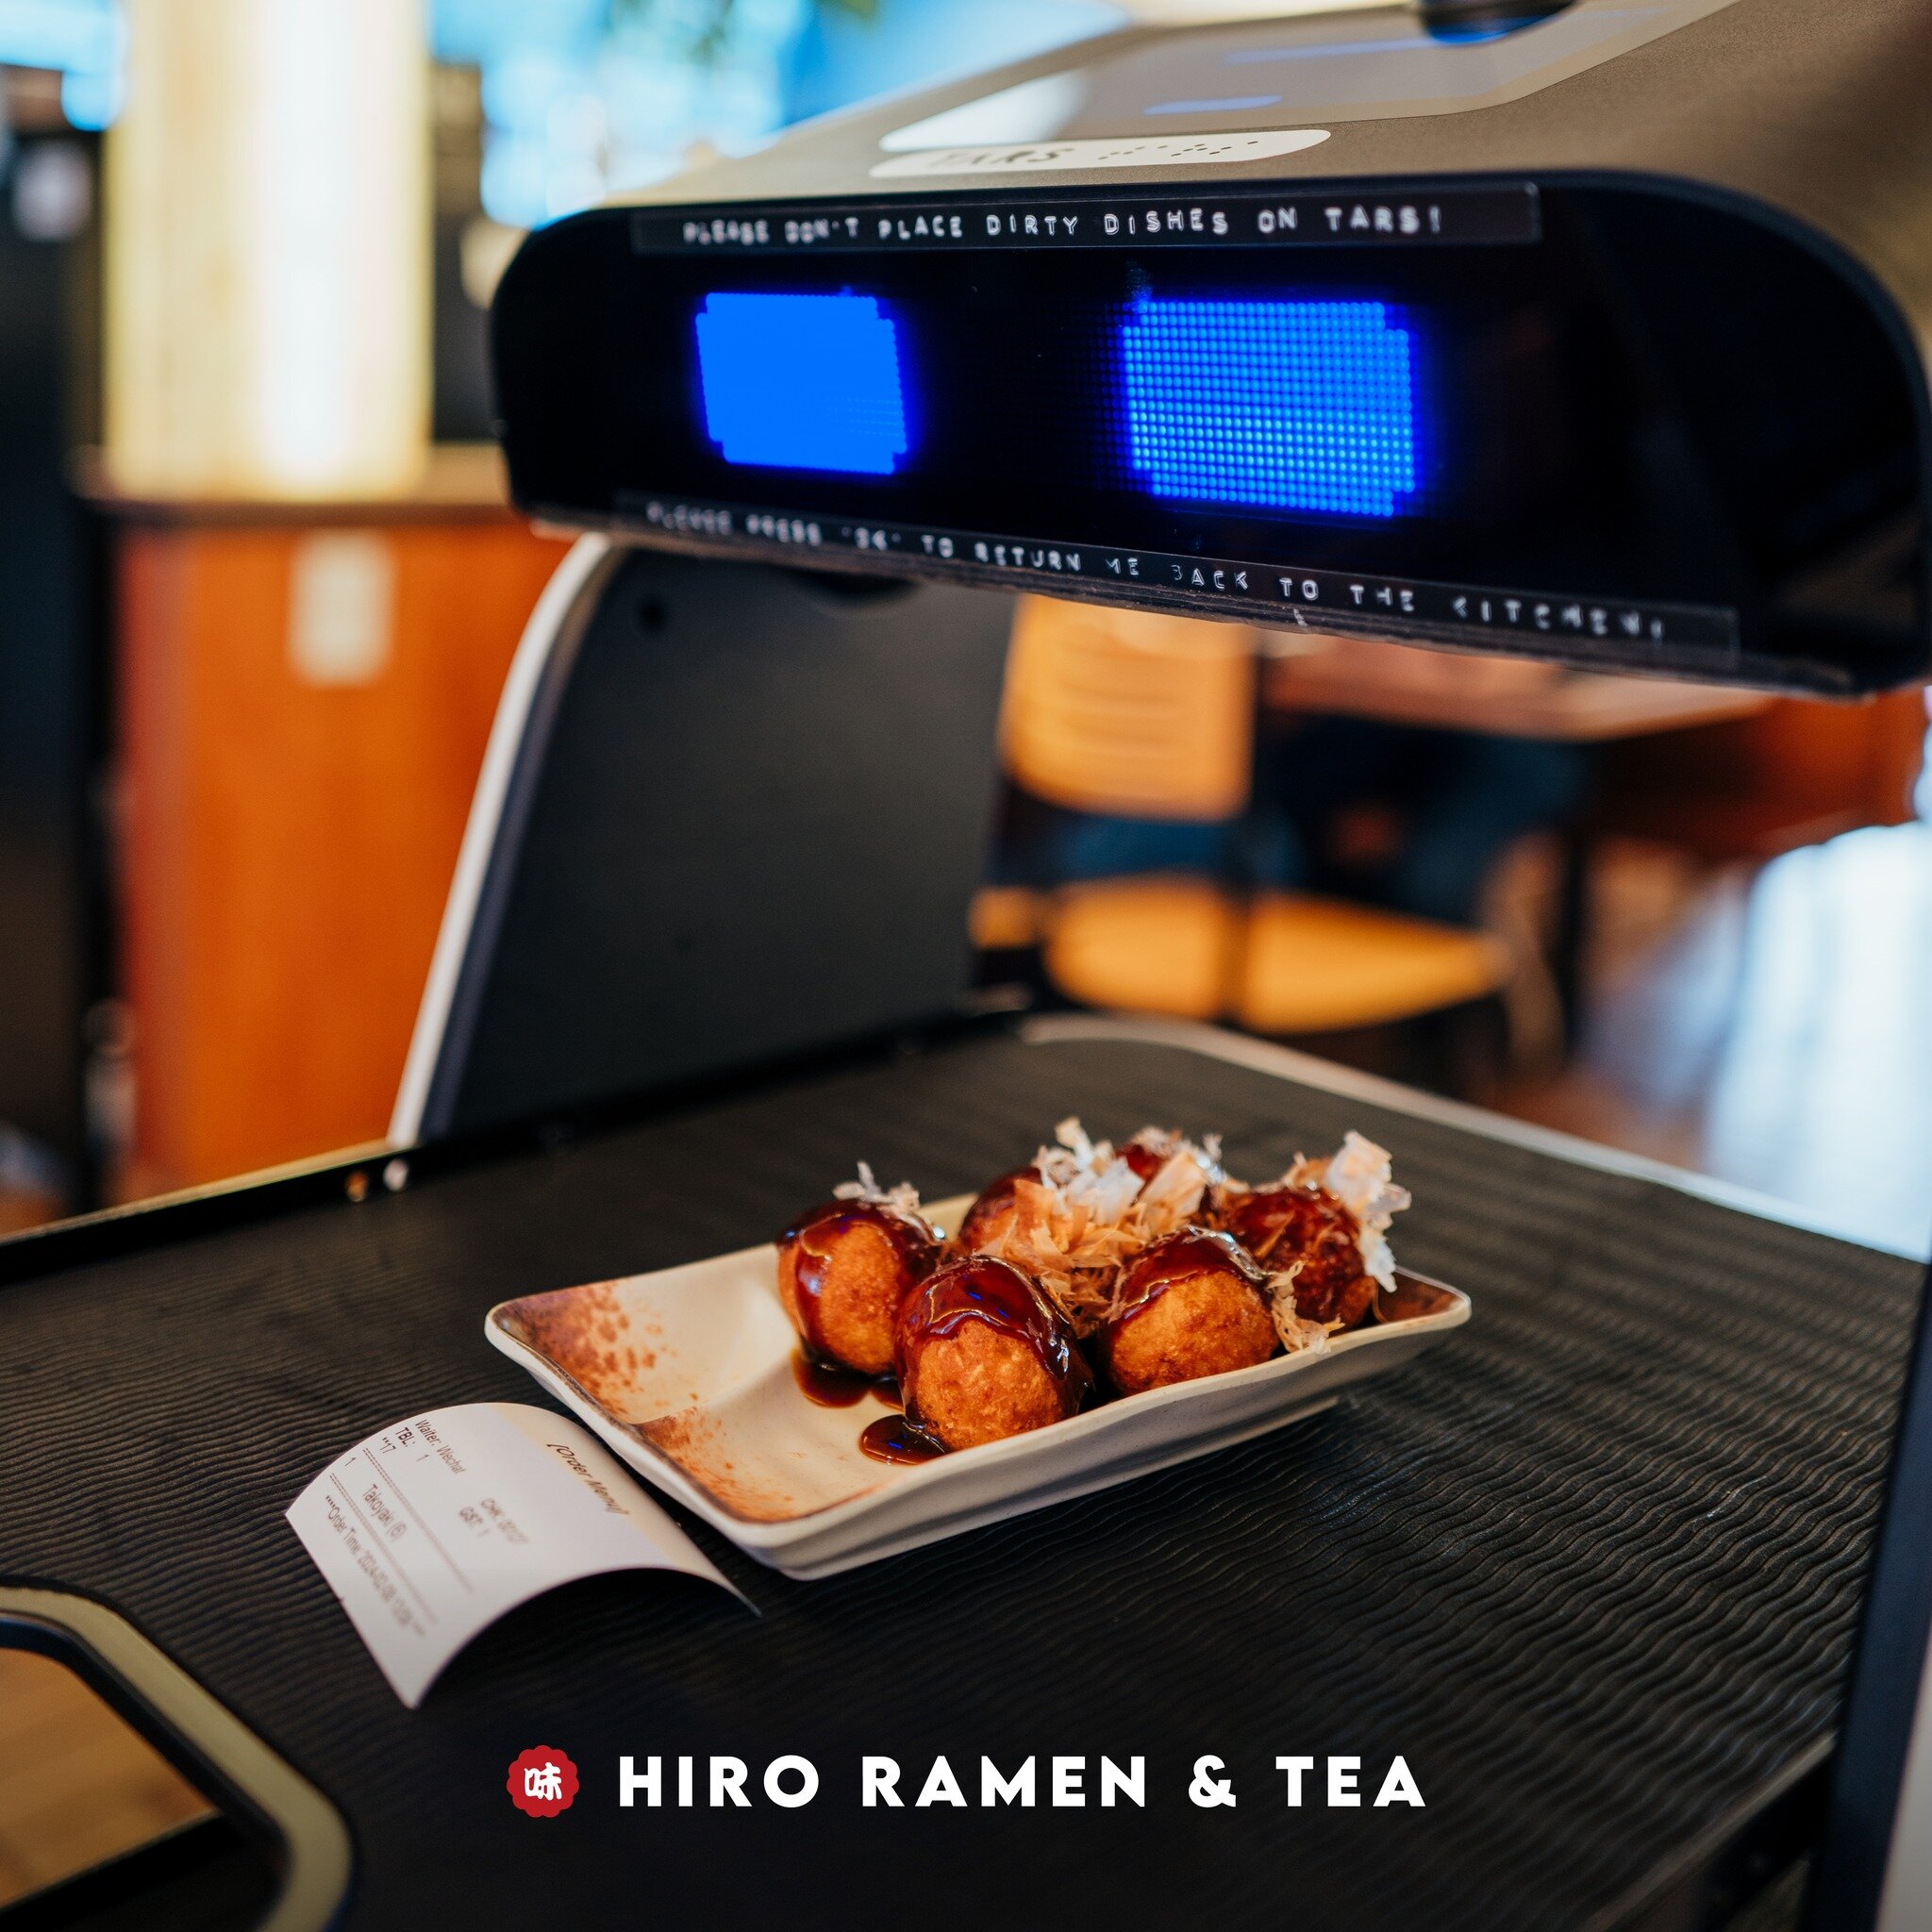 It's Friday! Come to Hiro this weekend, rest and relax as TARS &amp; CASE feed you food!

#columbusohio #asseenincolumbus #ramen #cravecbus #614 #614eats #614columbus #ohiostate #columbusfoodscene #columbusfoodbloggers #osu #cbusfoodbloggers #cbusfoo